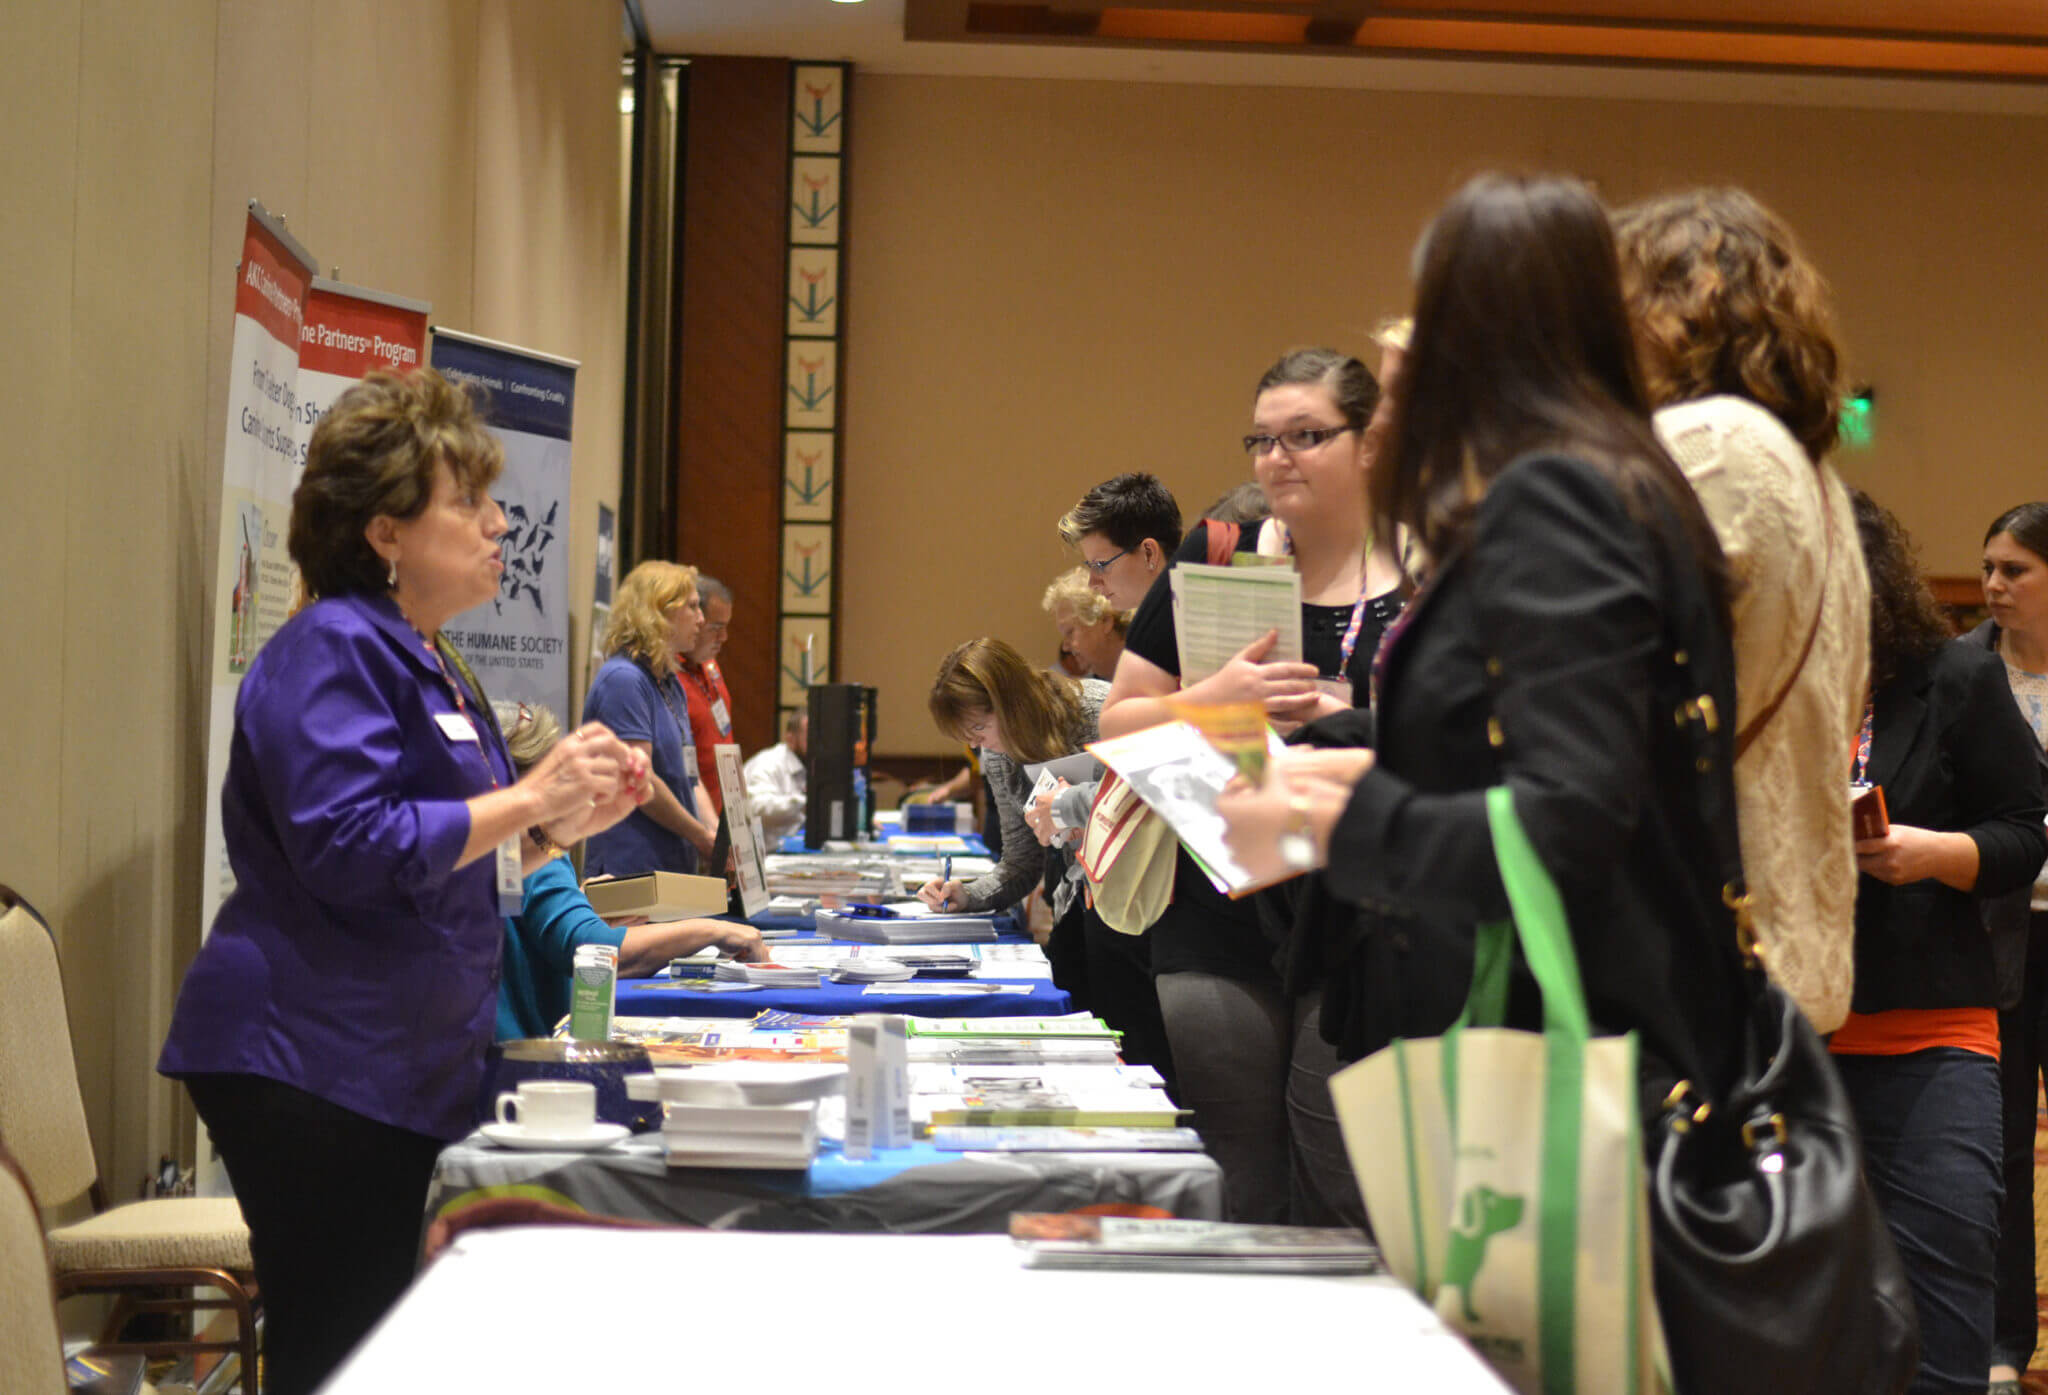 Conference sponsors were on hand in the exhibitor hall to share new and exciting products and services with attendees!